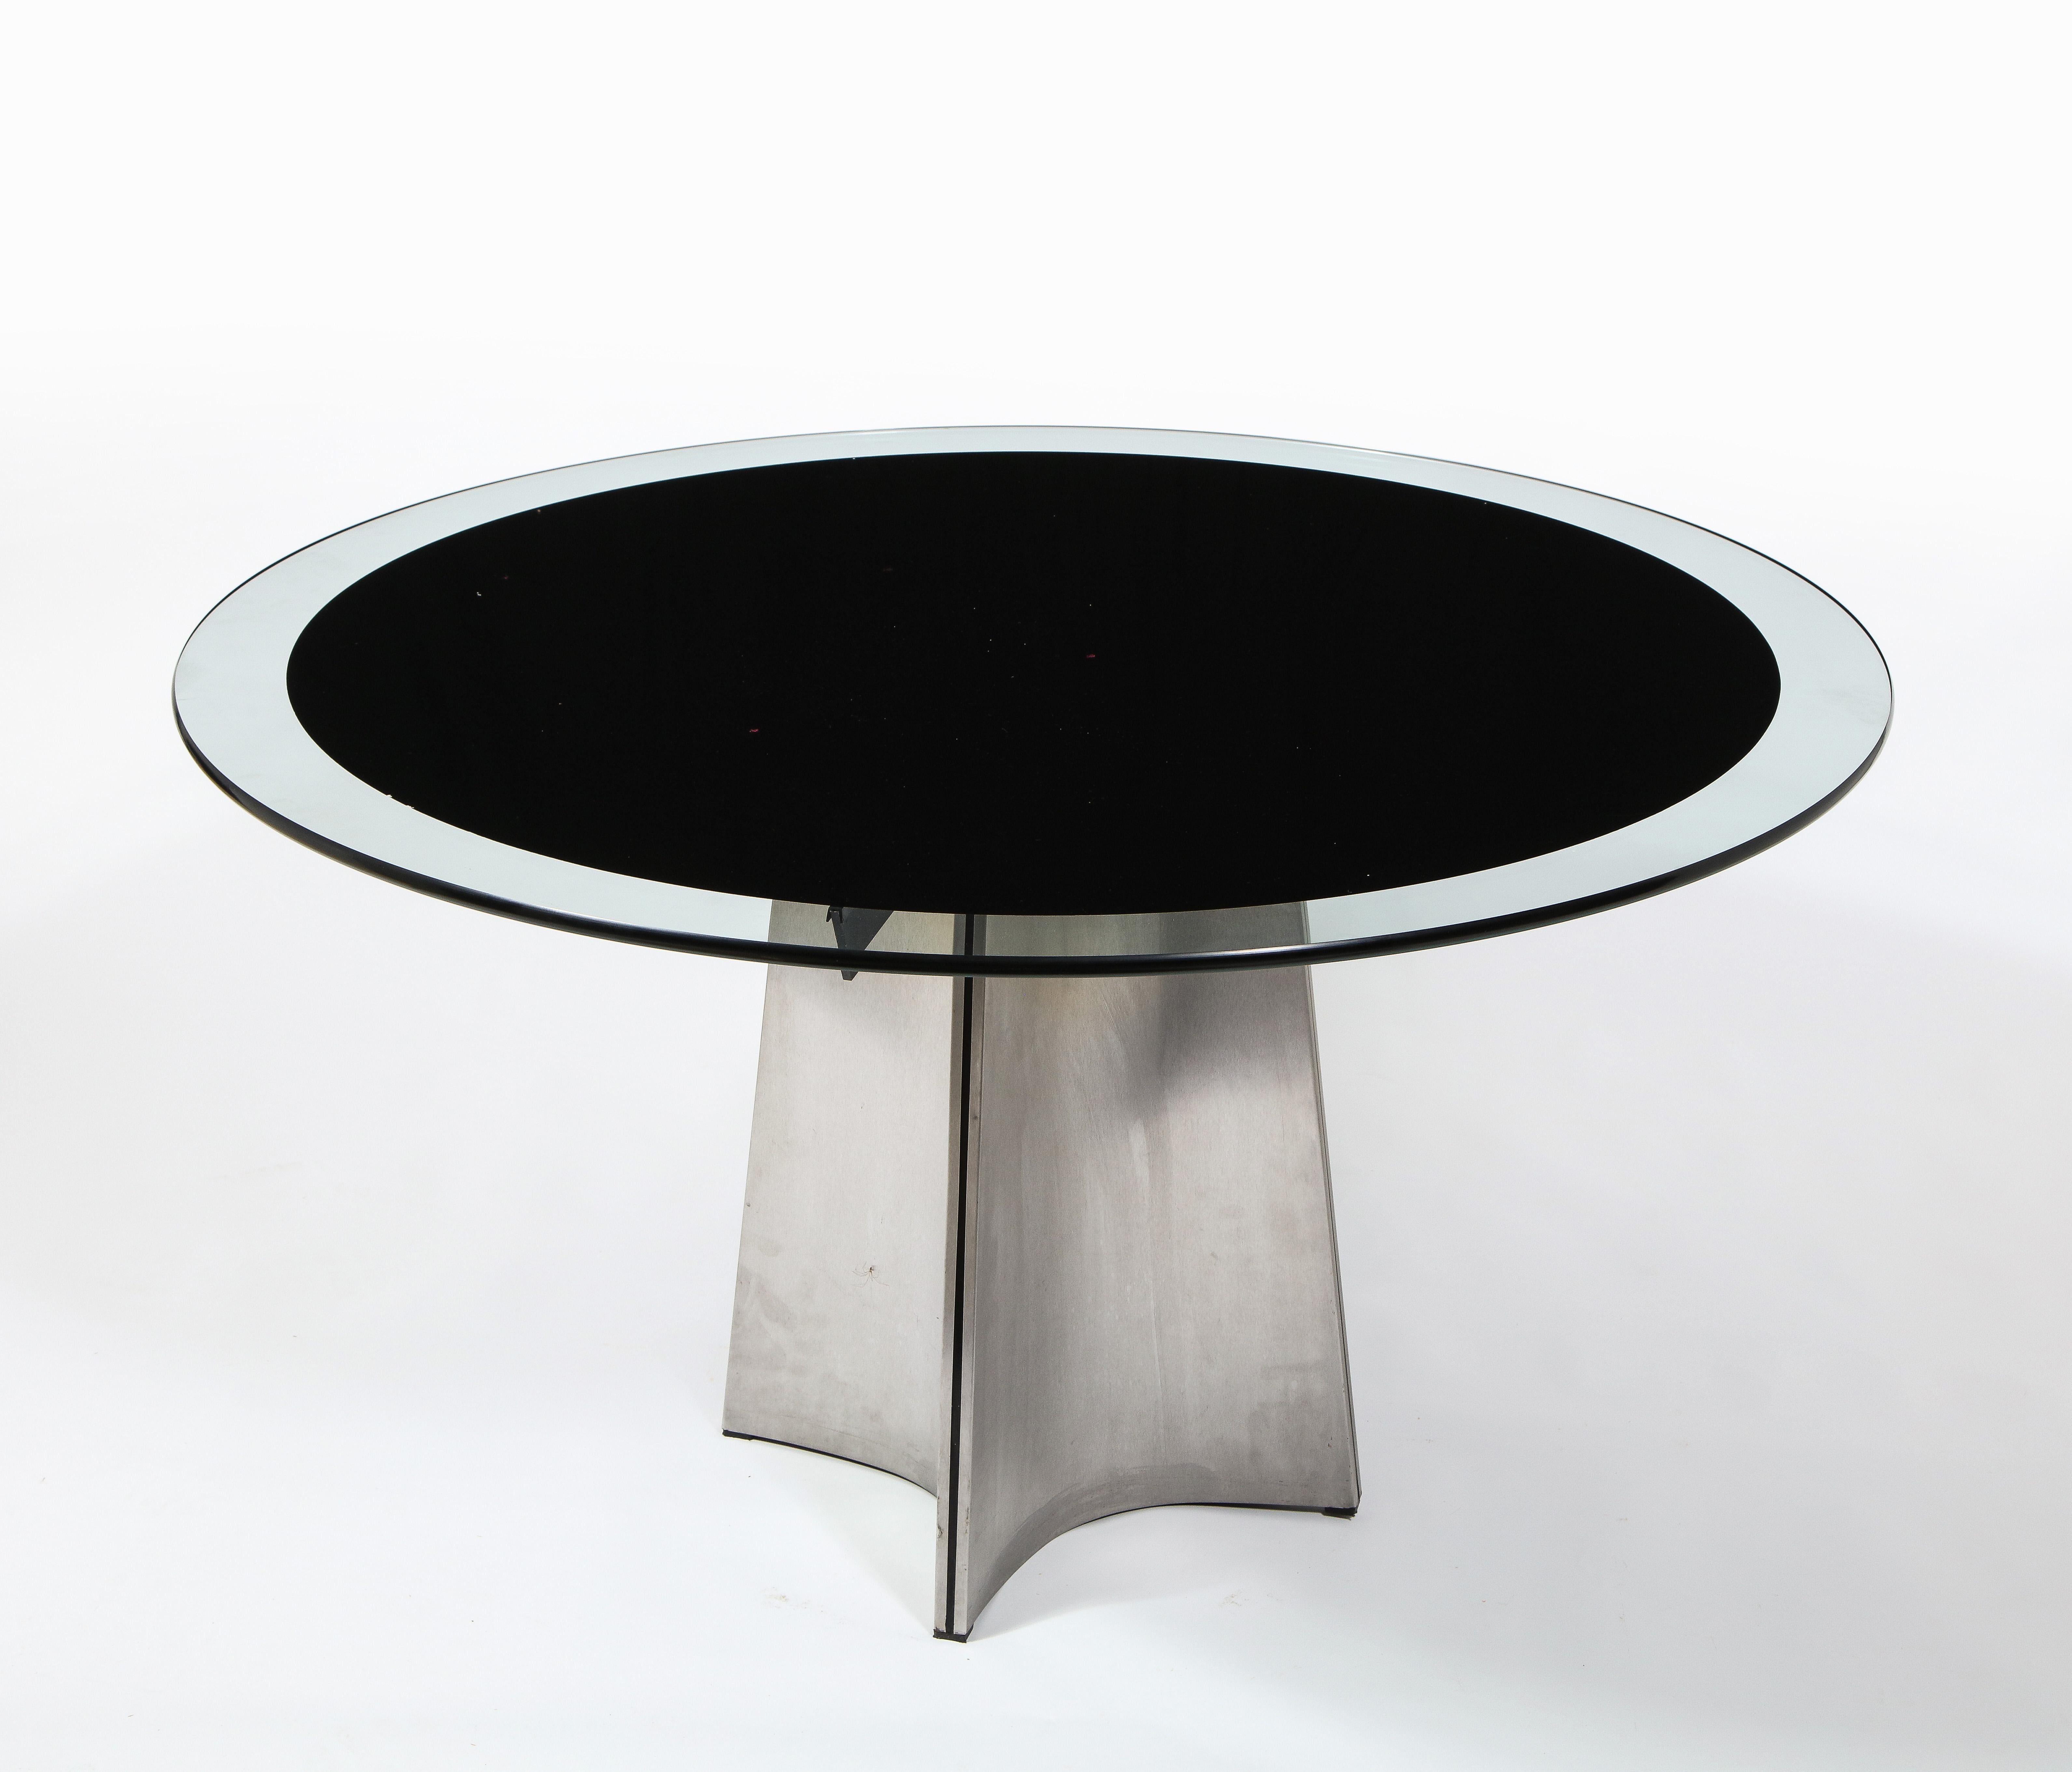 Round thick glass top with black enamel, brushed steel
Dimensions: 28 in high x 58.5 in diameter.